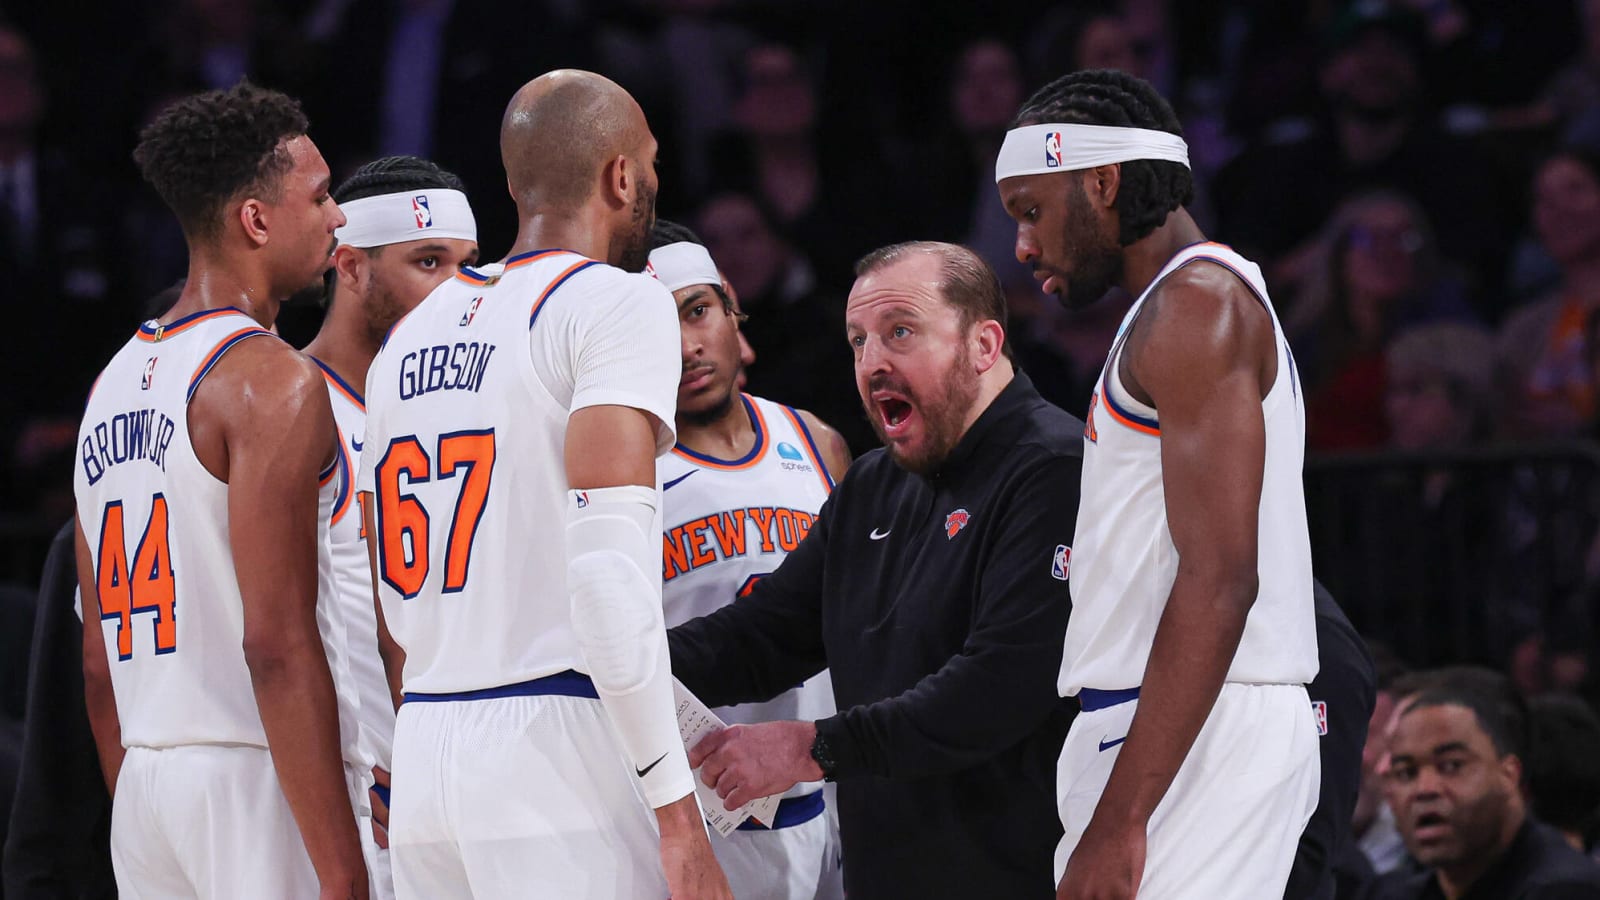 The Knicks are capable of winning the Eastern Conference